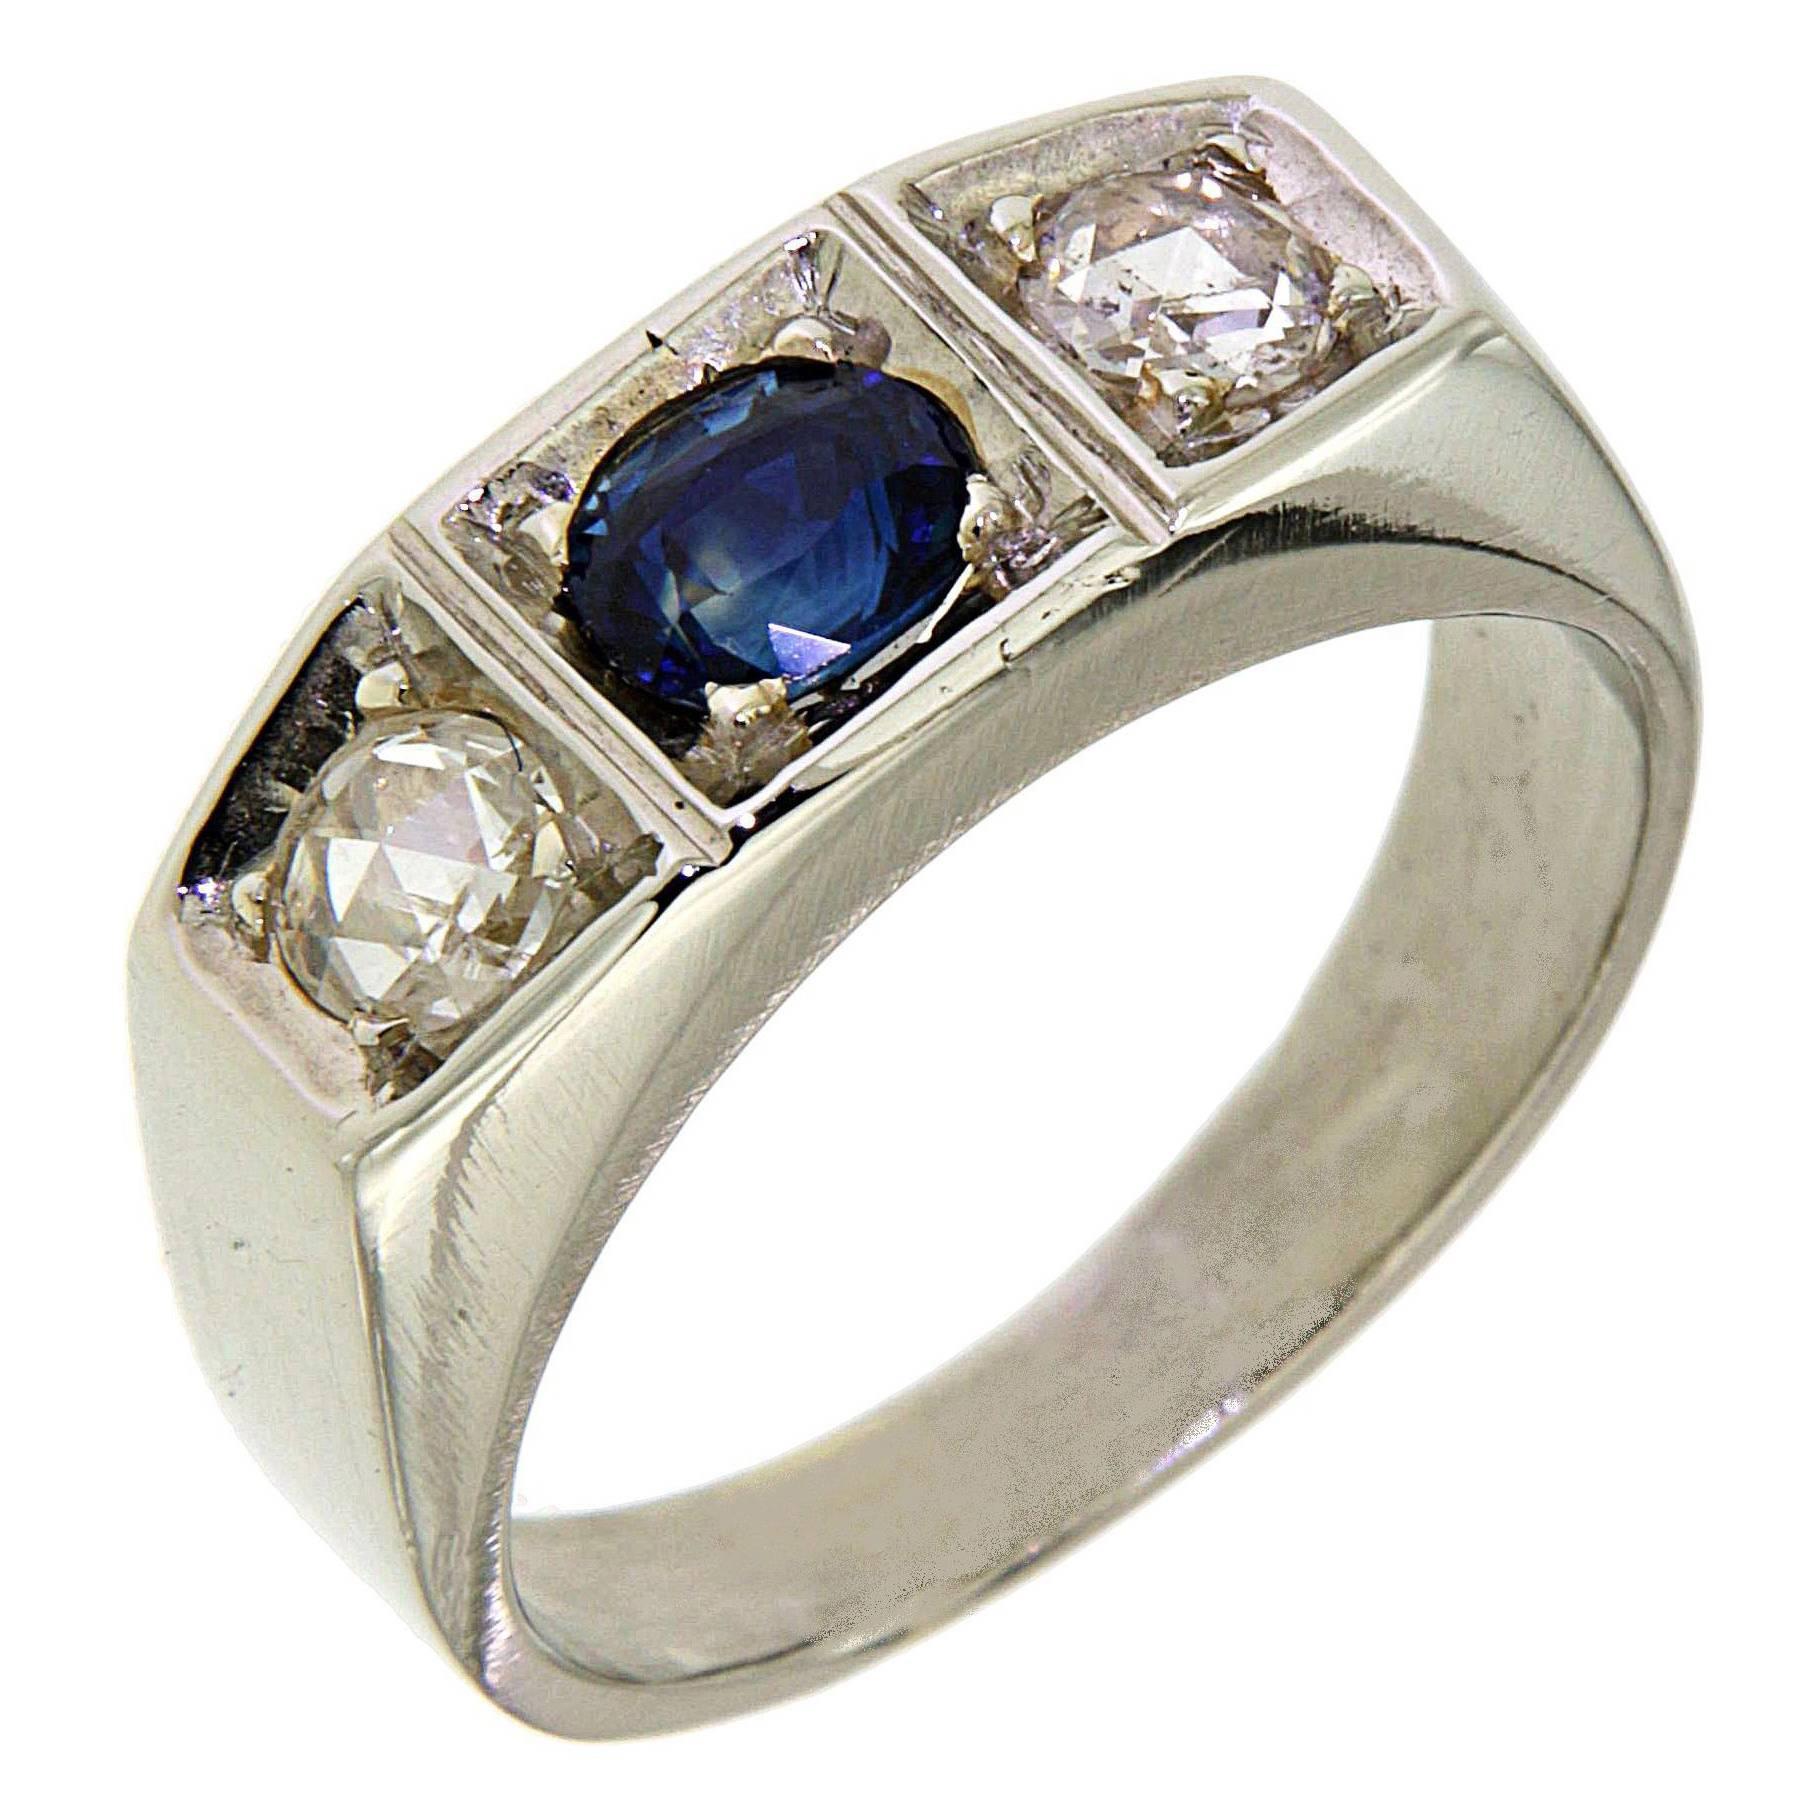 1930s Blue Sapphire Diamonds White Gold Band Ring Made in Italy